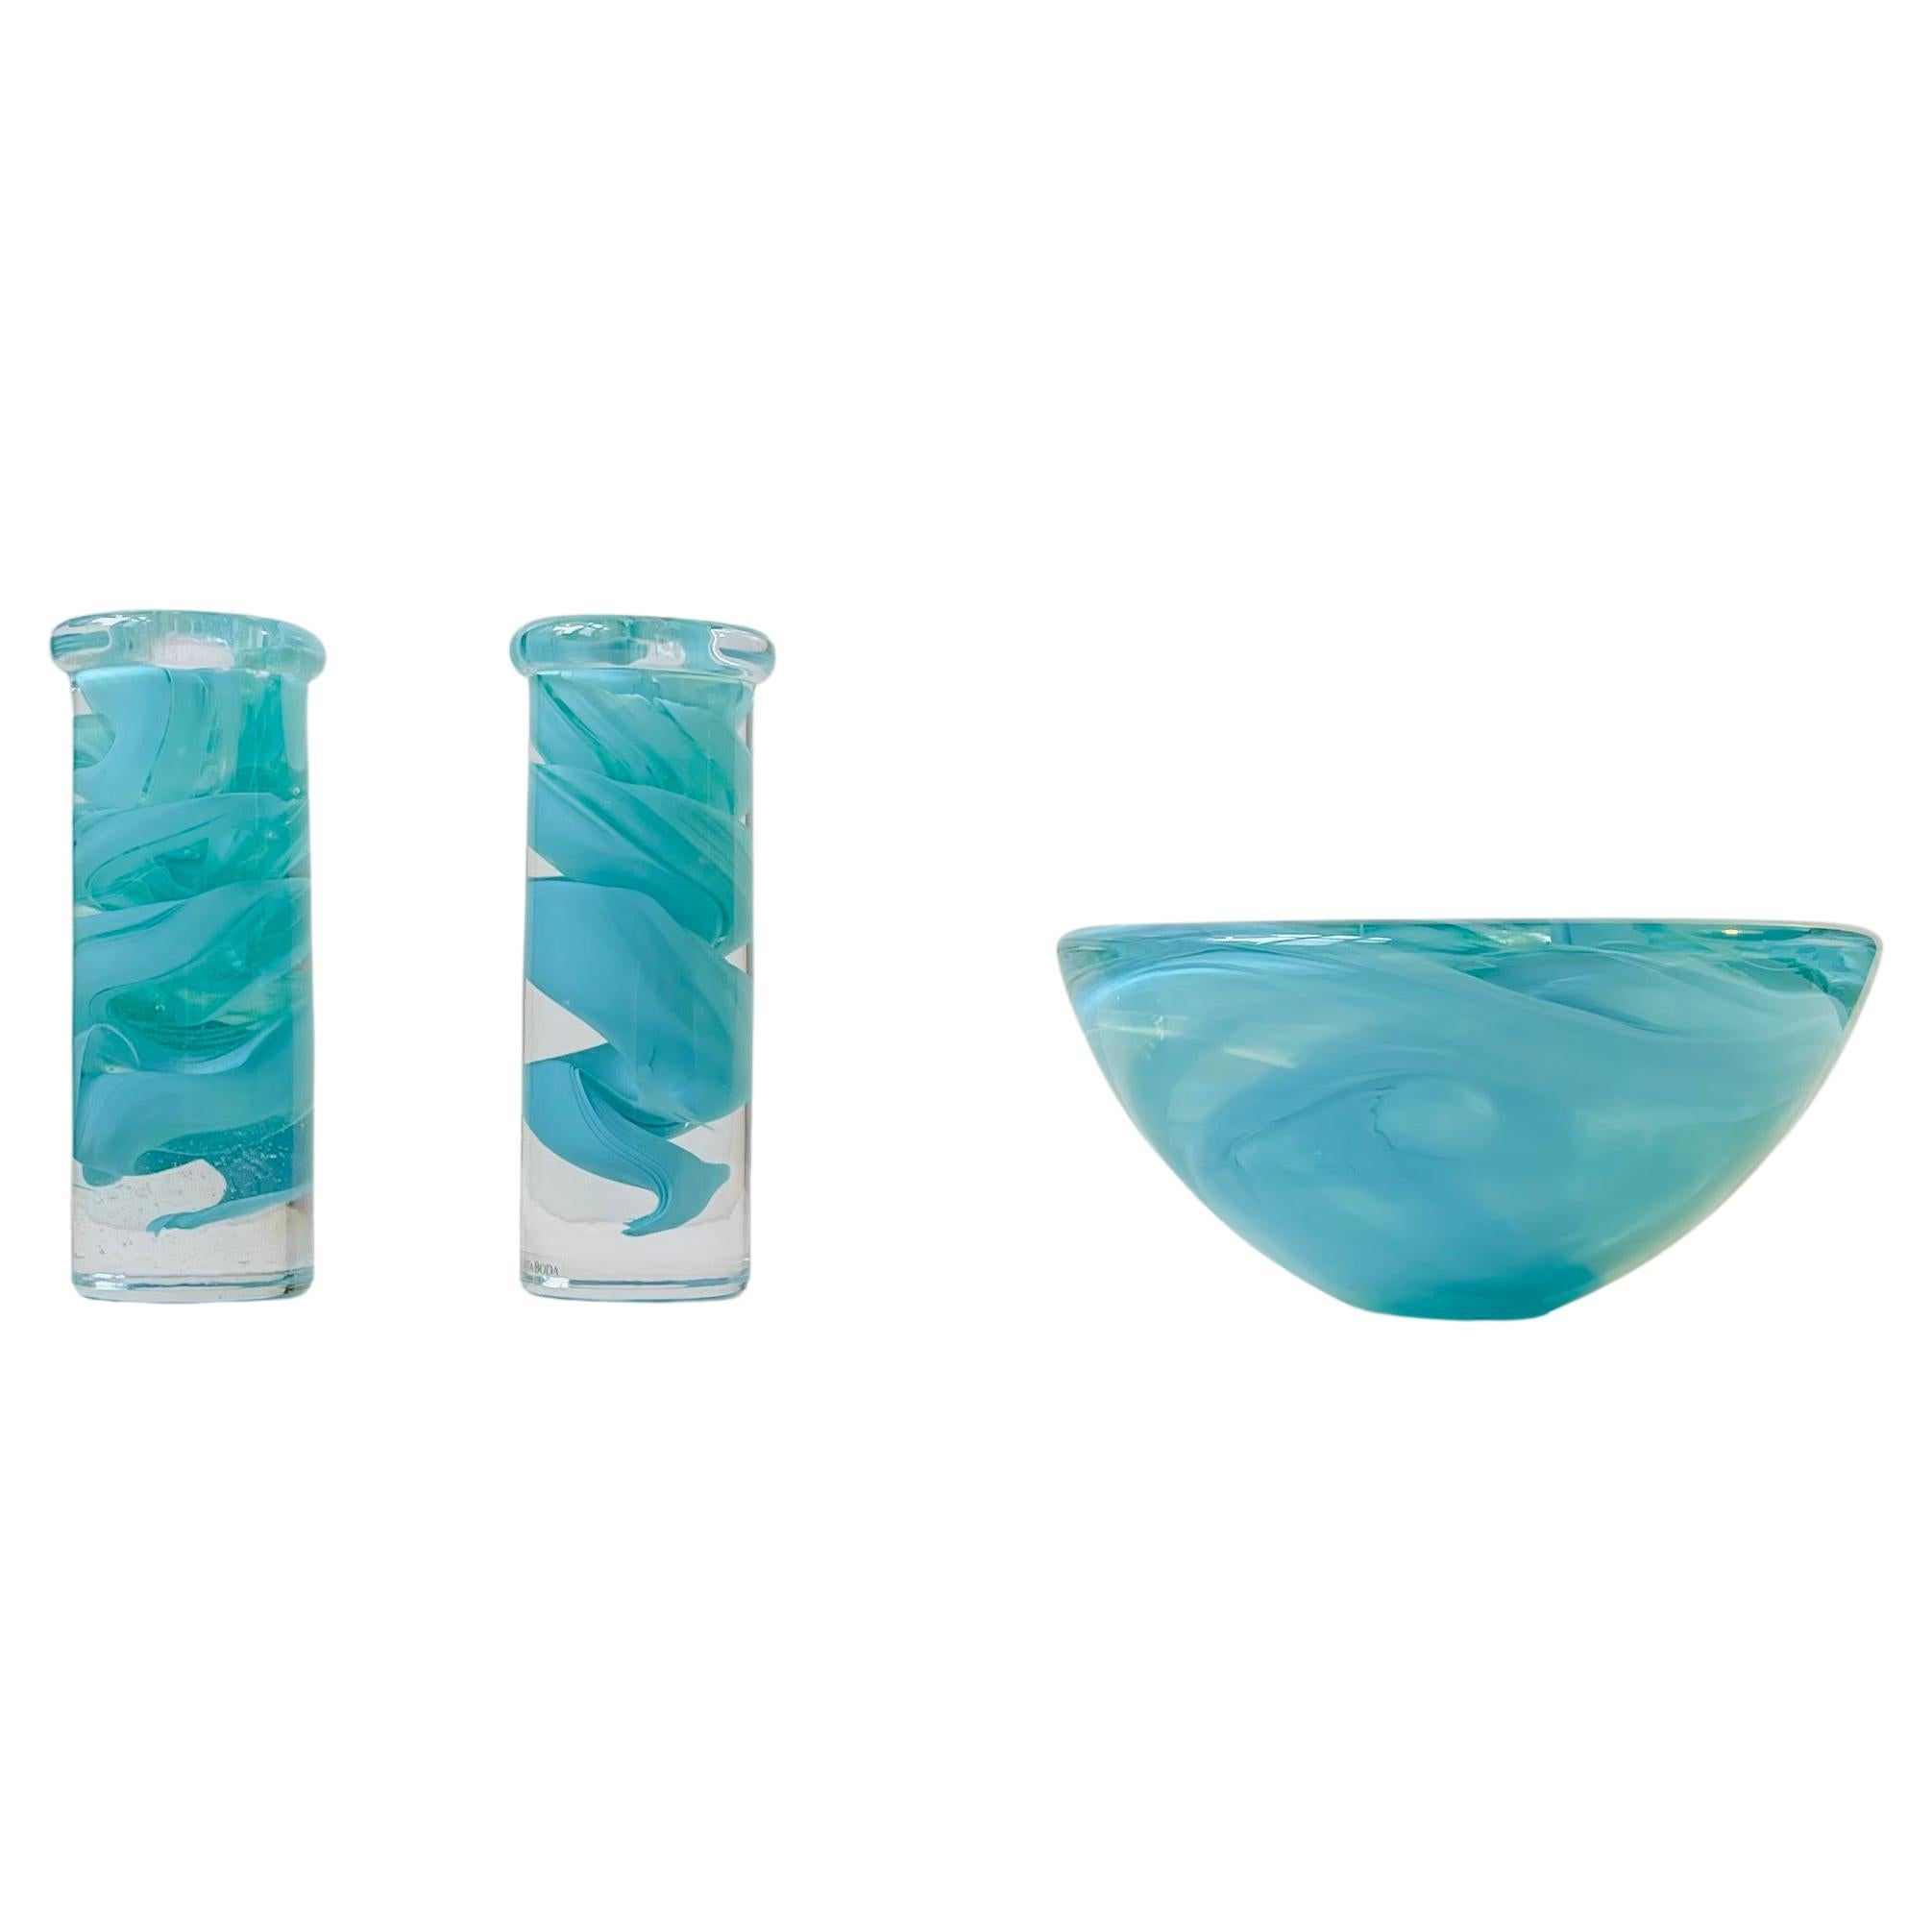 Art Glass Bowl and Candlesticks by Anna Ehrner for Kosta Boda, 1980s